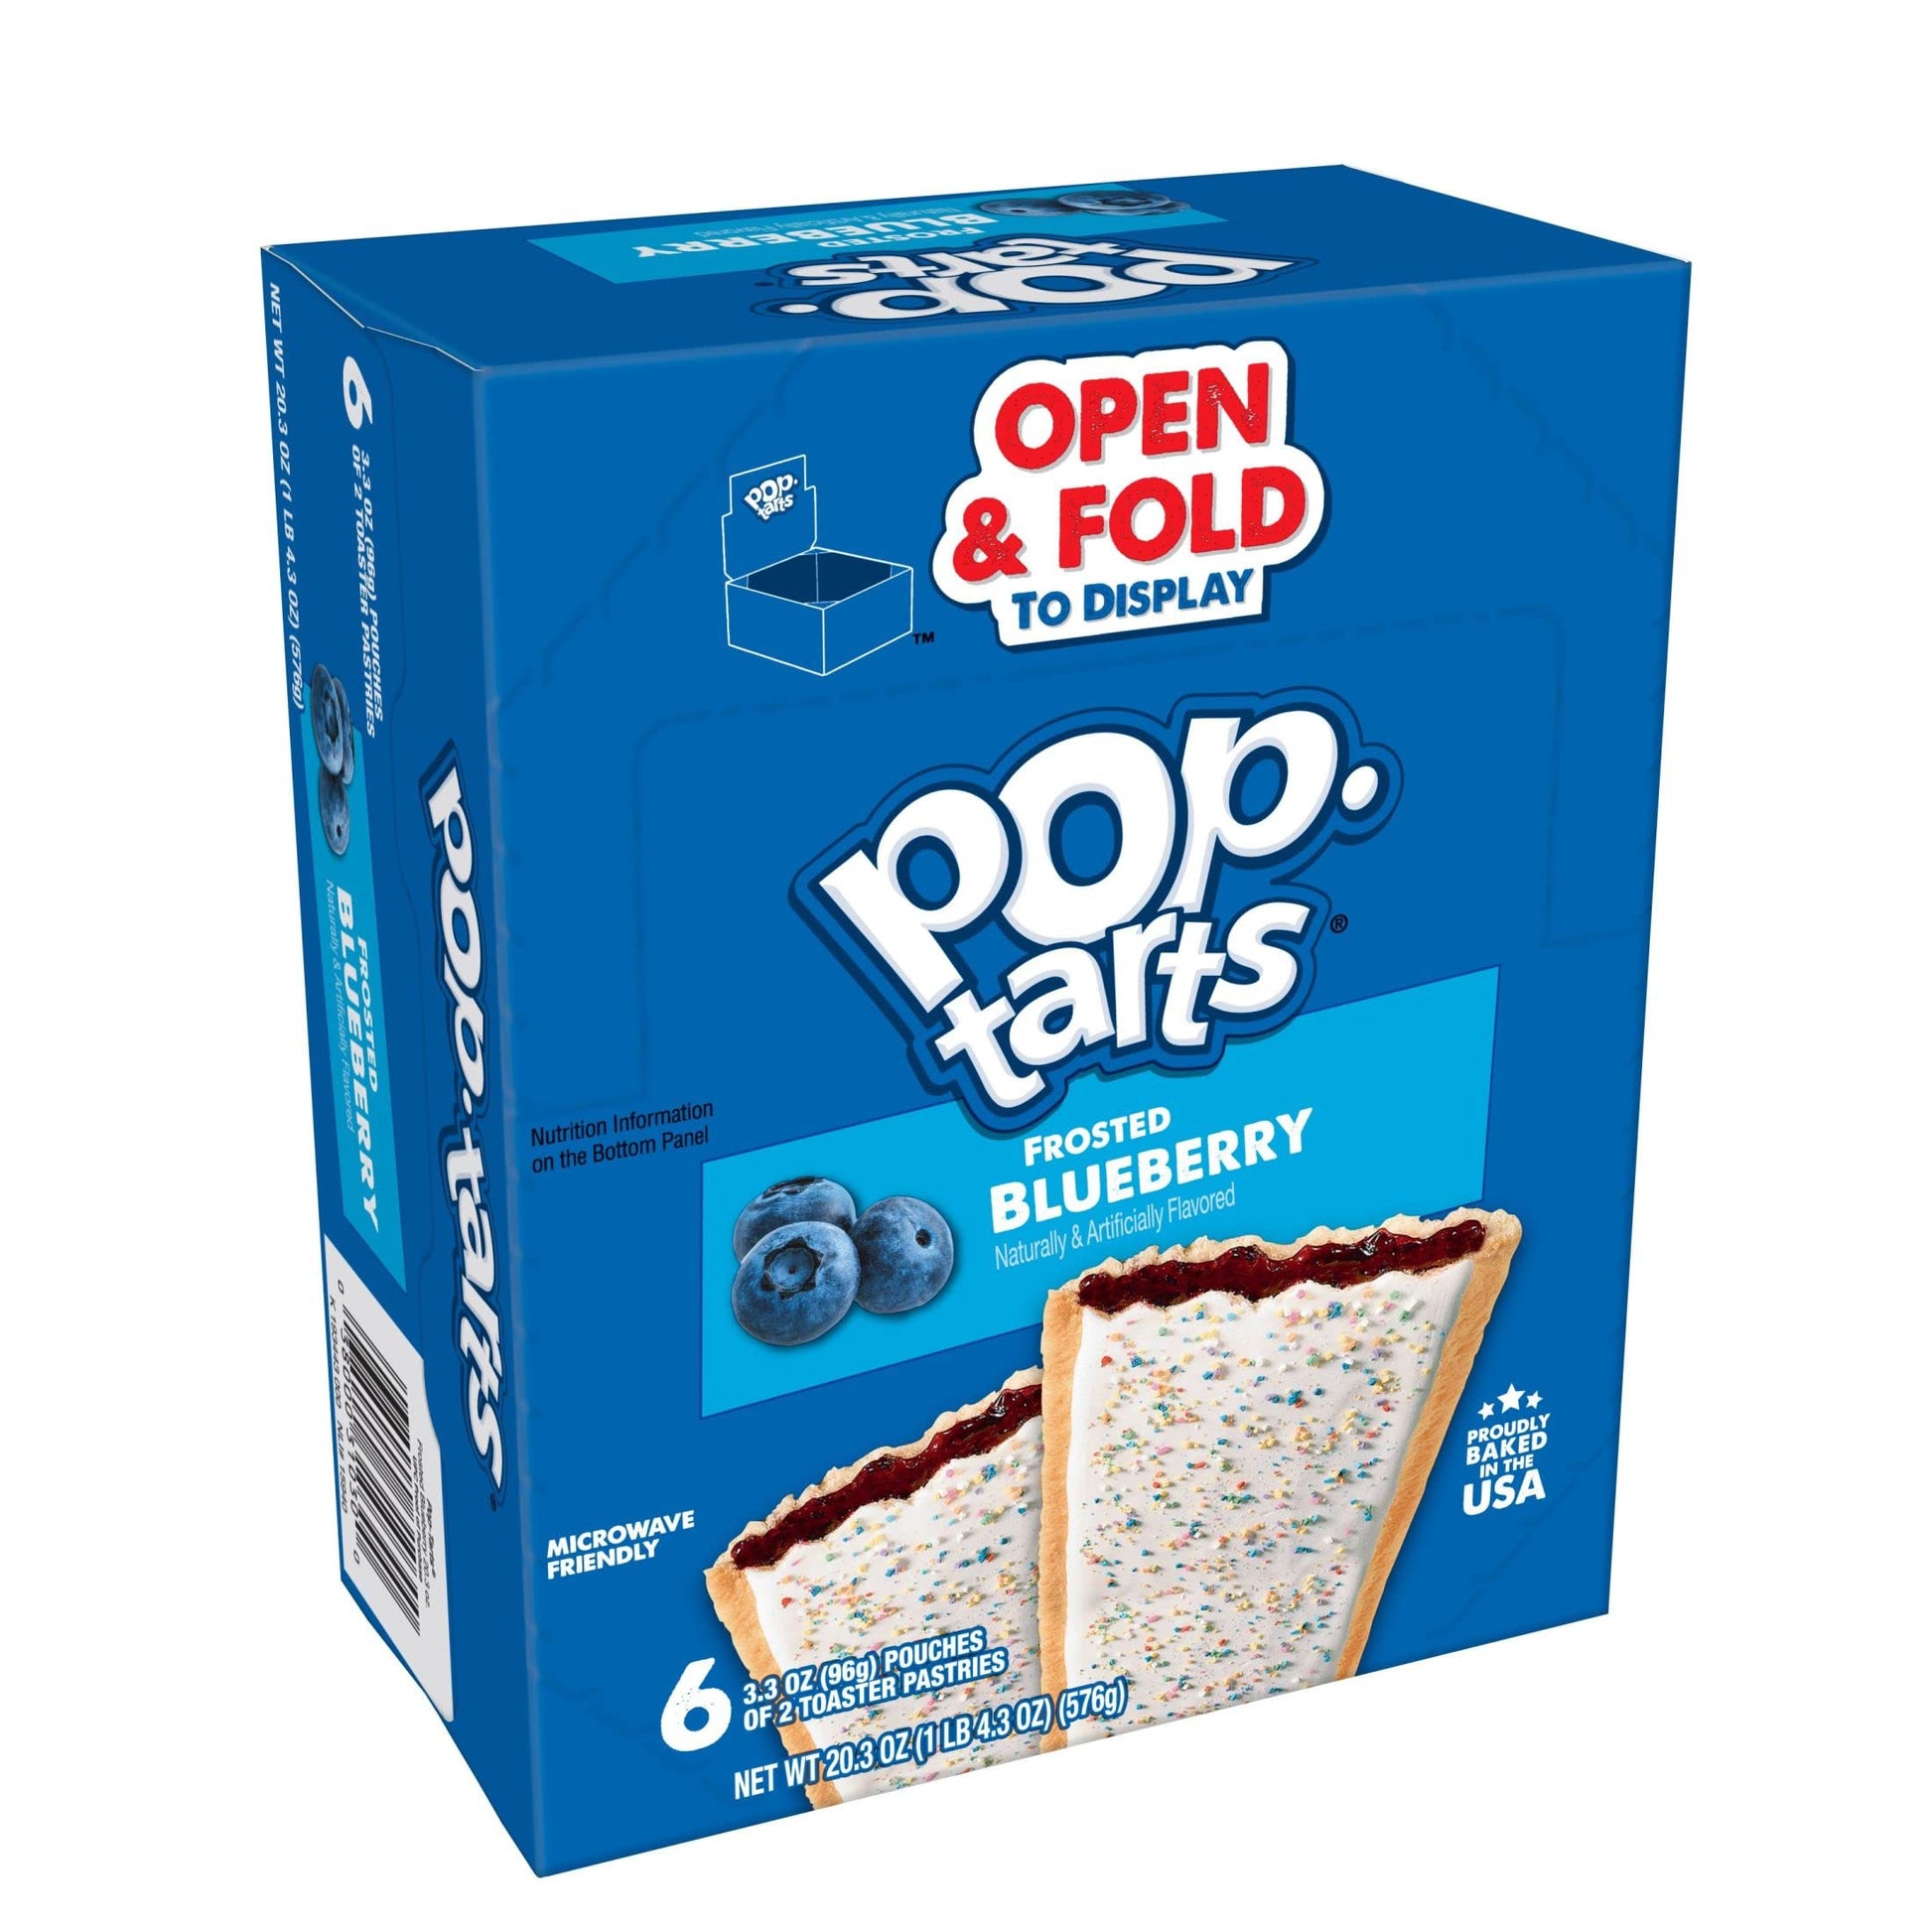 Pop-Tarts Frosted Blueberry (Pack of 6)